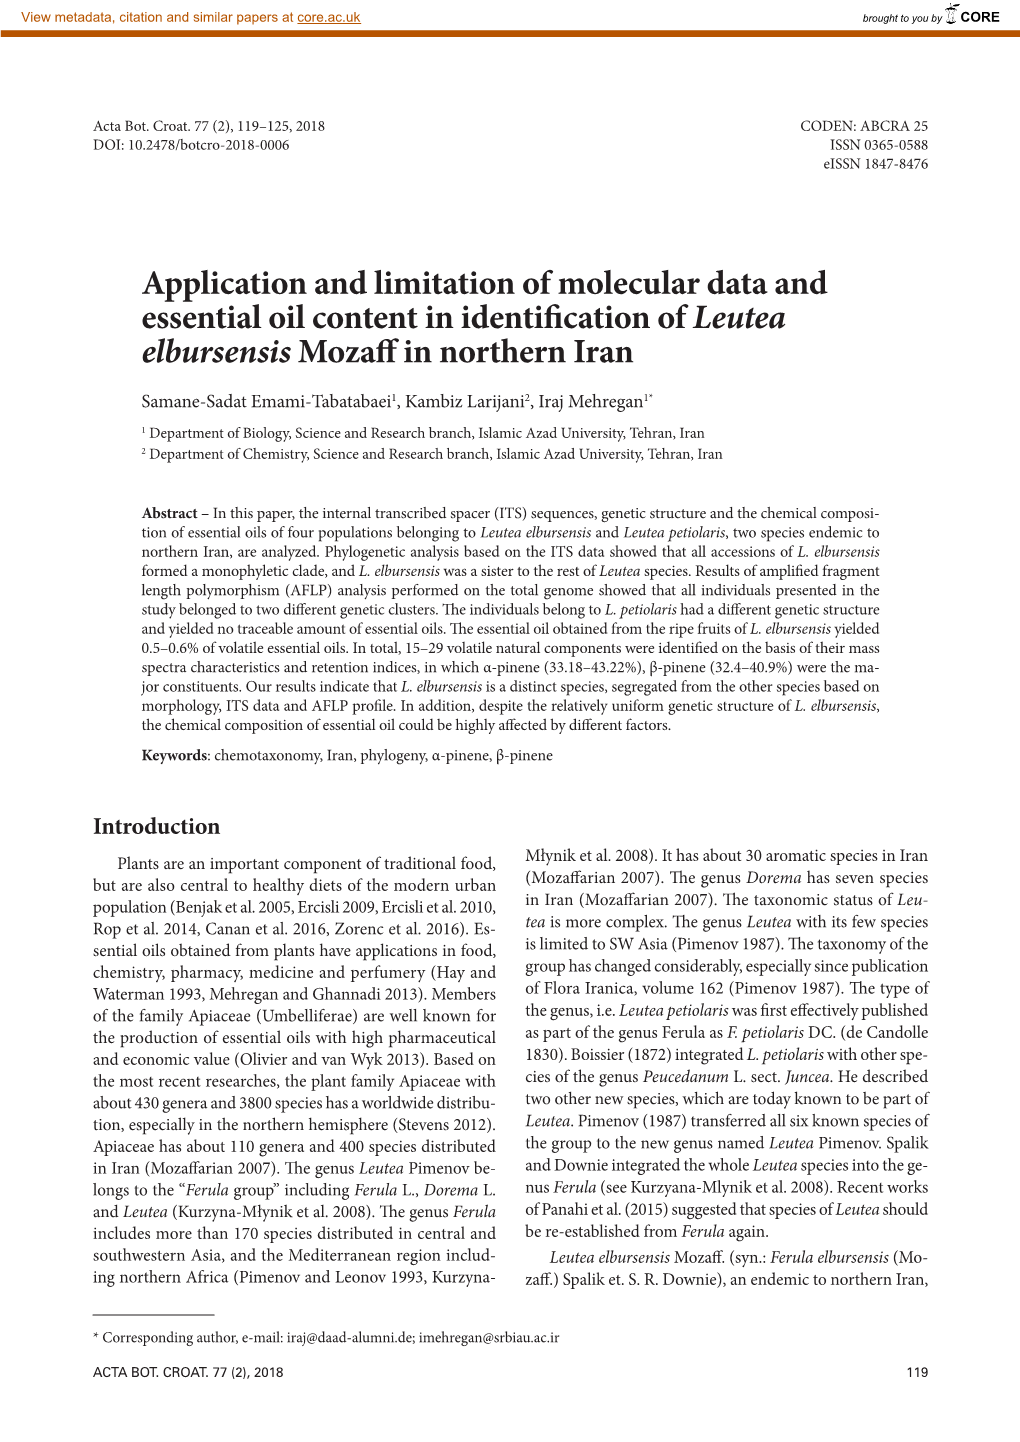 Application and Limitation of Molecular Data and Essential Oil Content in Identification of Leutea Elbursensis Mozaff in Northern Iran